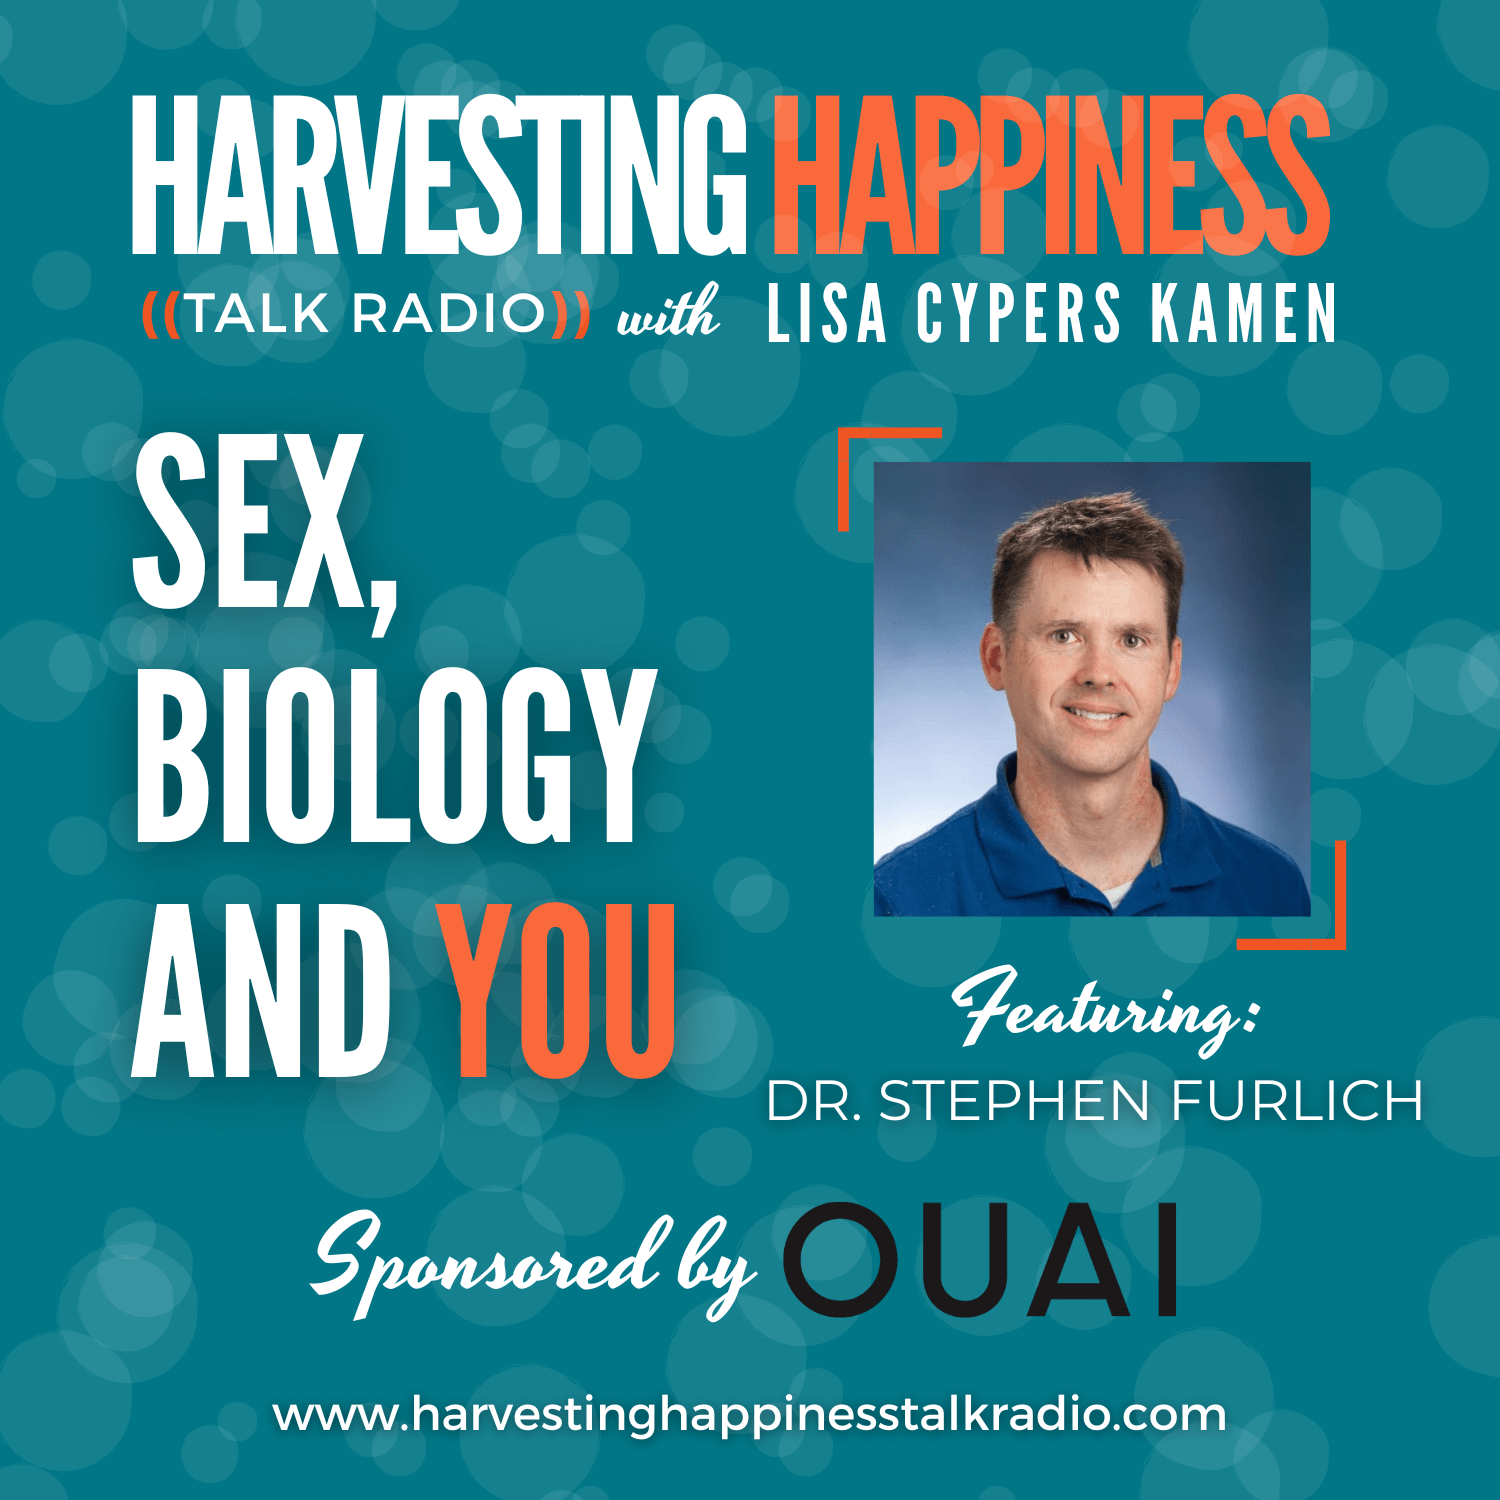 Sex, Biology, and You with Dr. Stephen Furlich and Lisa Cypers Kamen speaking about chemistry between people